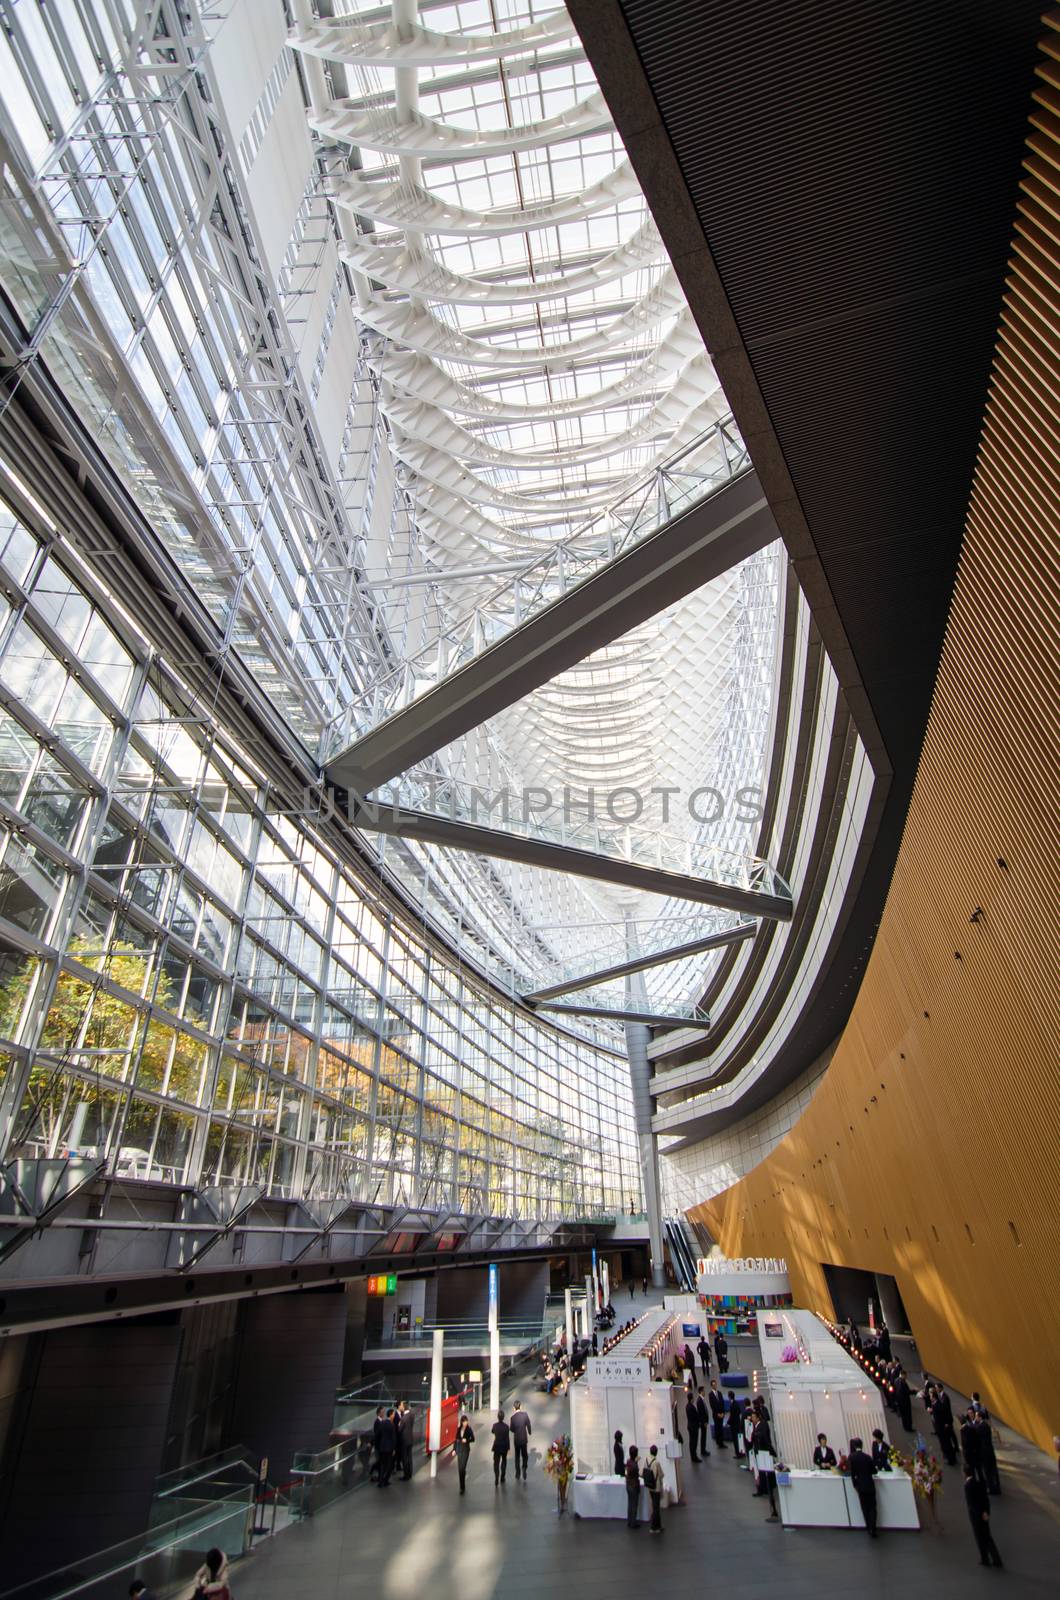 Tokyo, Japan - November 26, 2013: People visit Tokyo International Forum on November 26 2013 in Tokyo Japan. the Forum is one of Tokyo's architectural marvels. Architect Rafael Vinoly won Japan's first international architecture competition with his design.